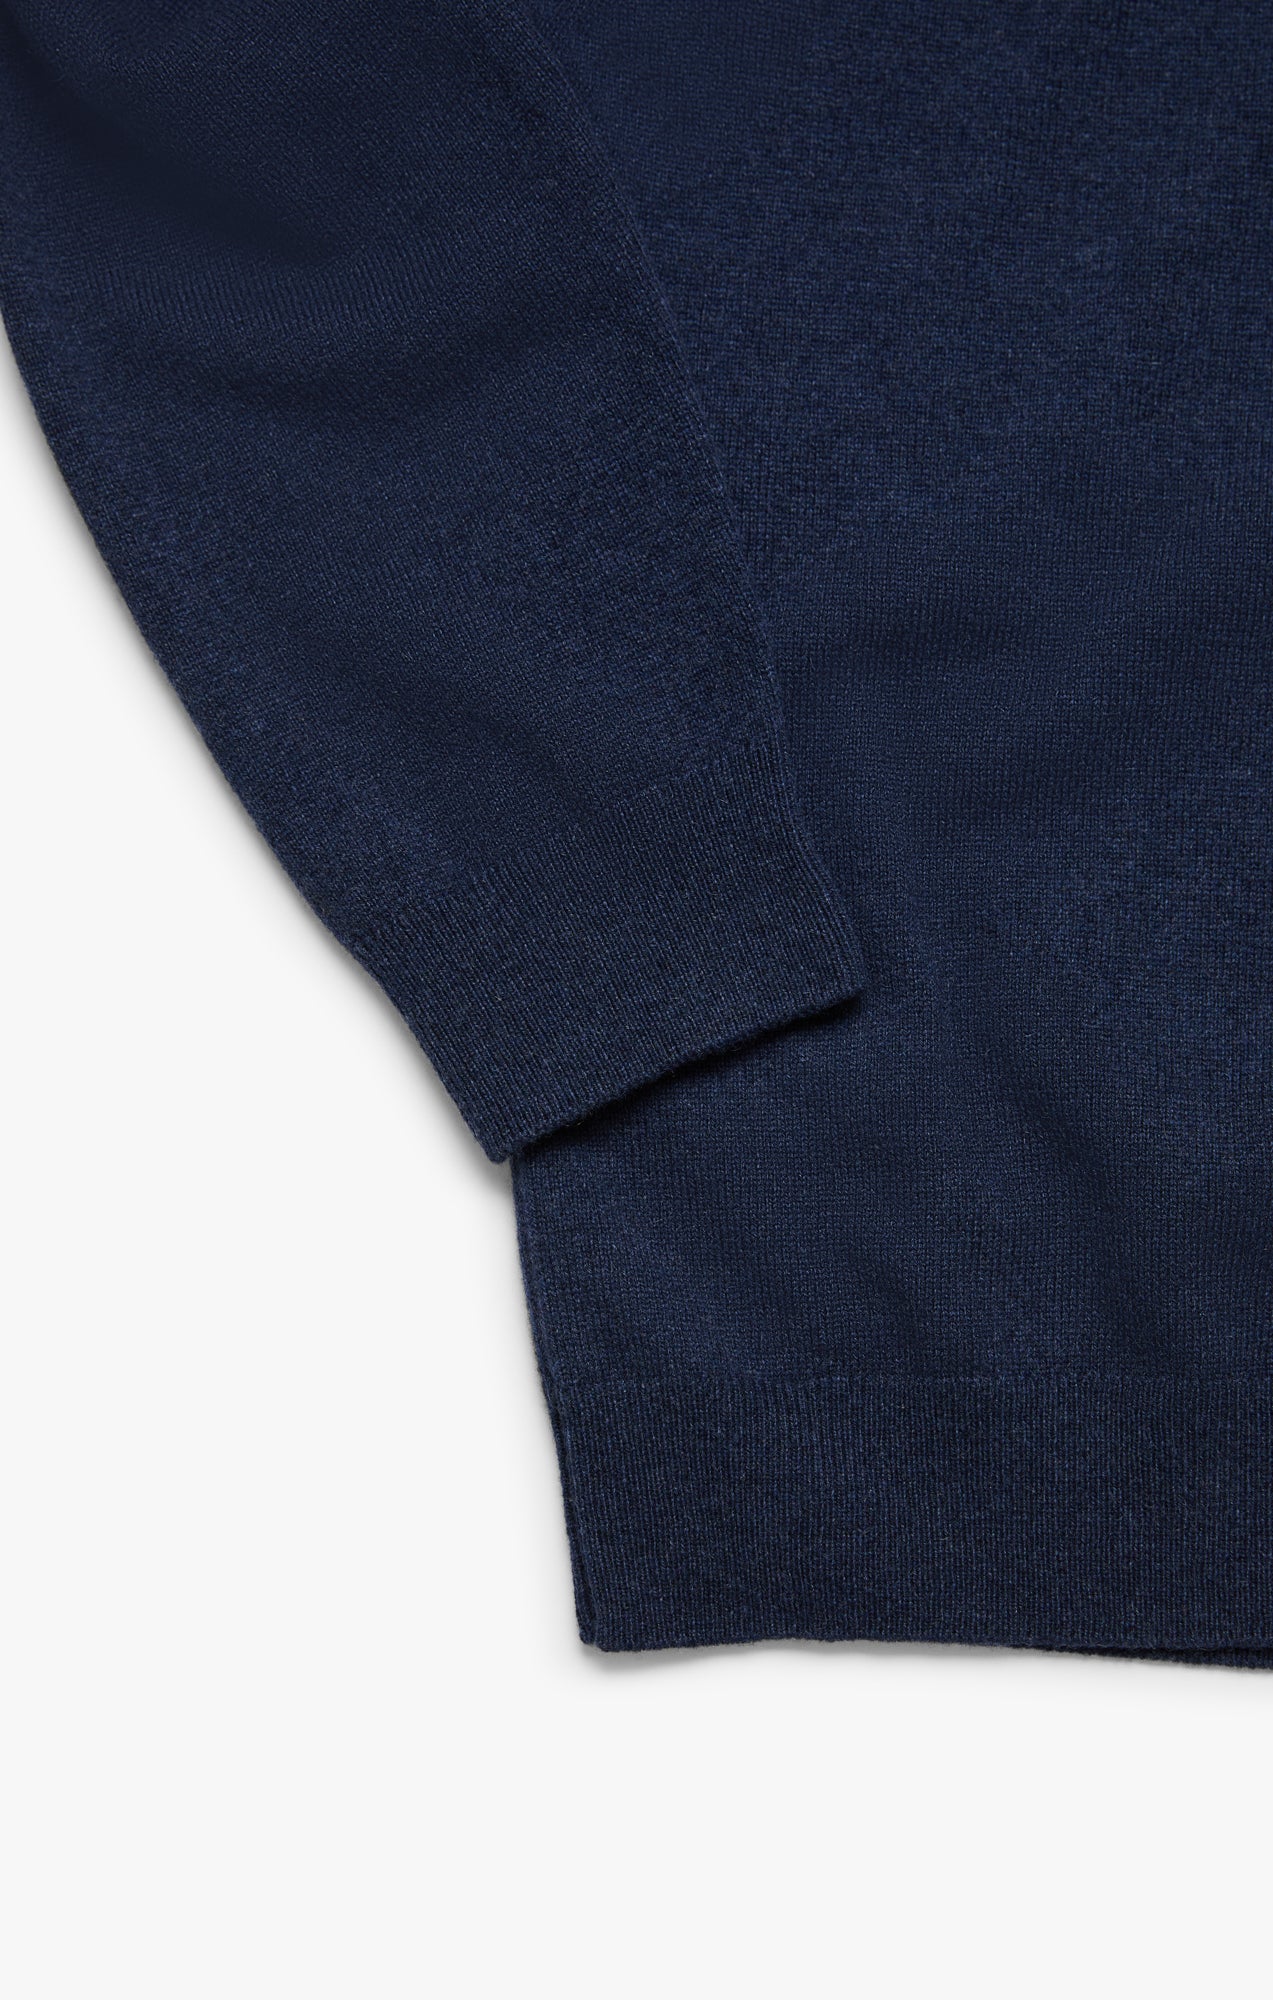 Cashmere Crew Neck Sweater In Navy Image 11